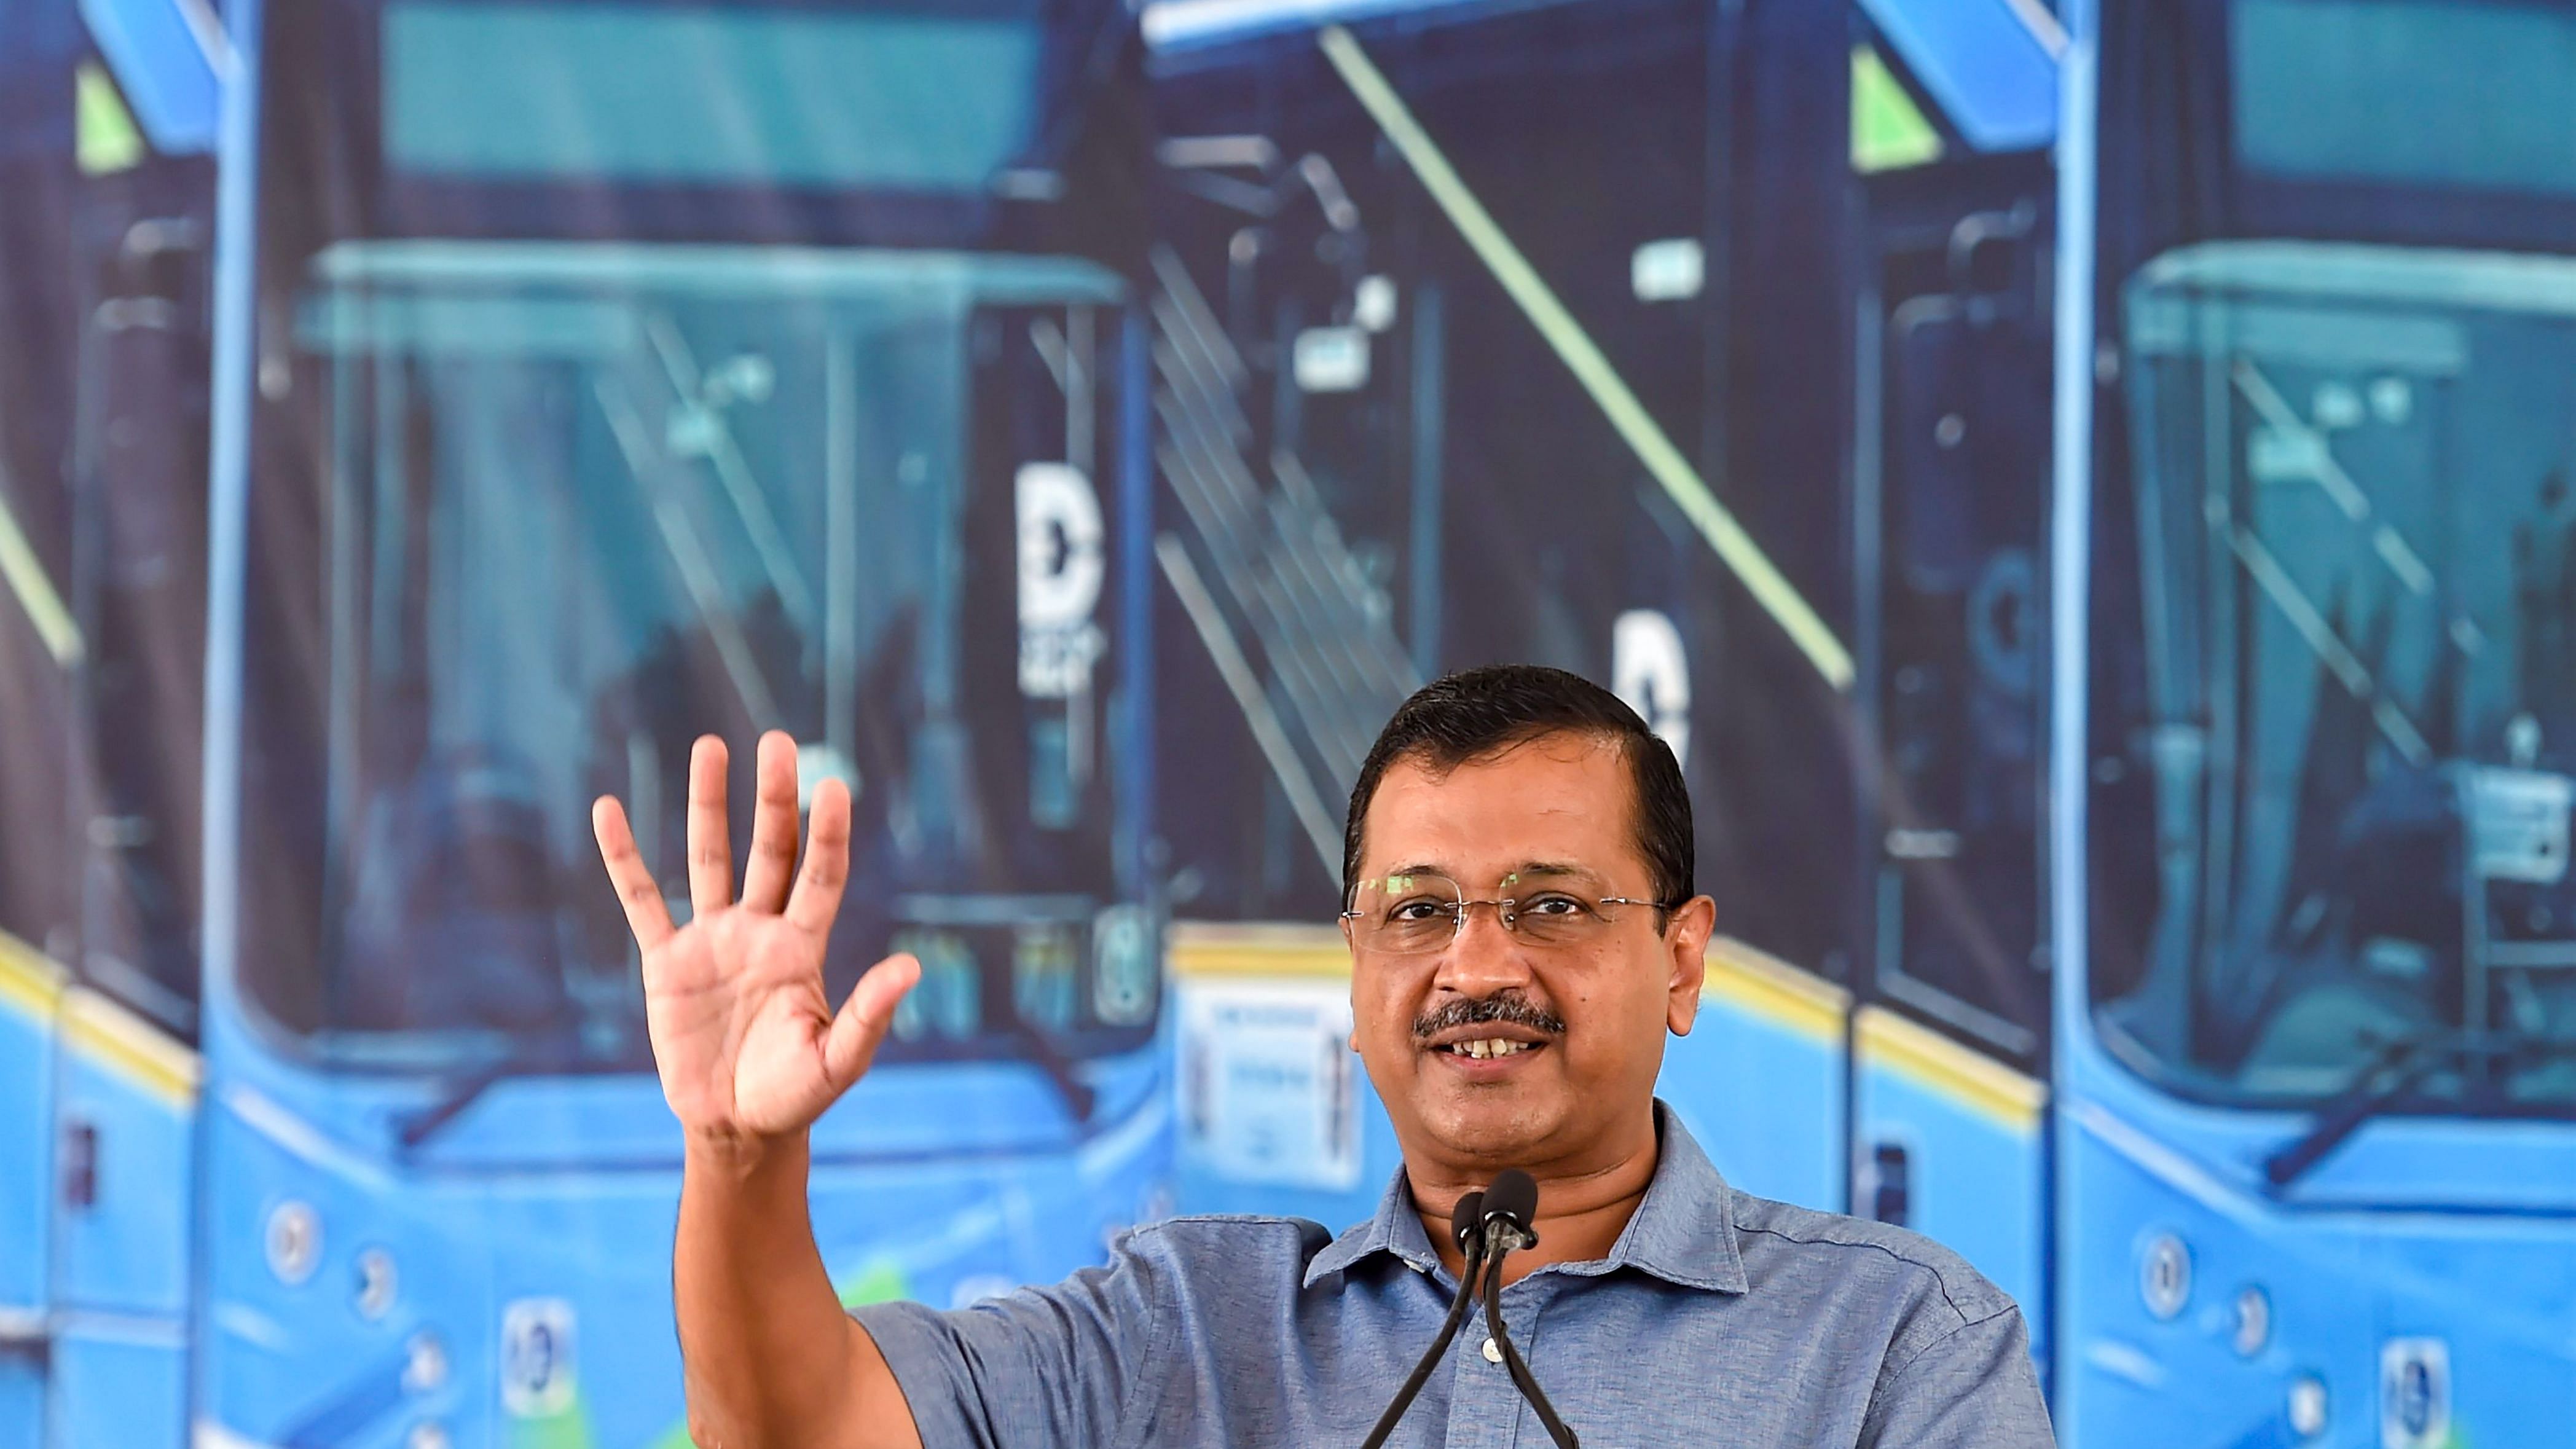  Delhi Chief Minister Arvind Kejriwal addresses during a ceremony to launch 97 electric buses, at Rajghat Bus Depot in New Delhi. Credit: PTI Photo